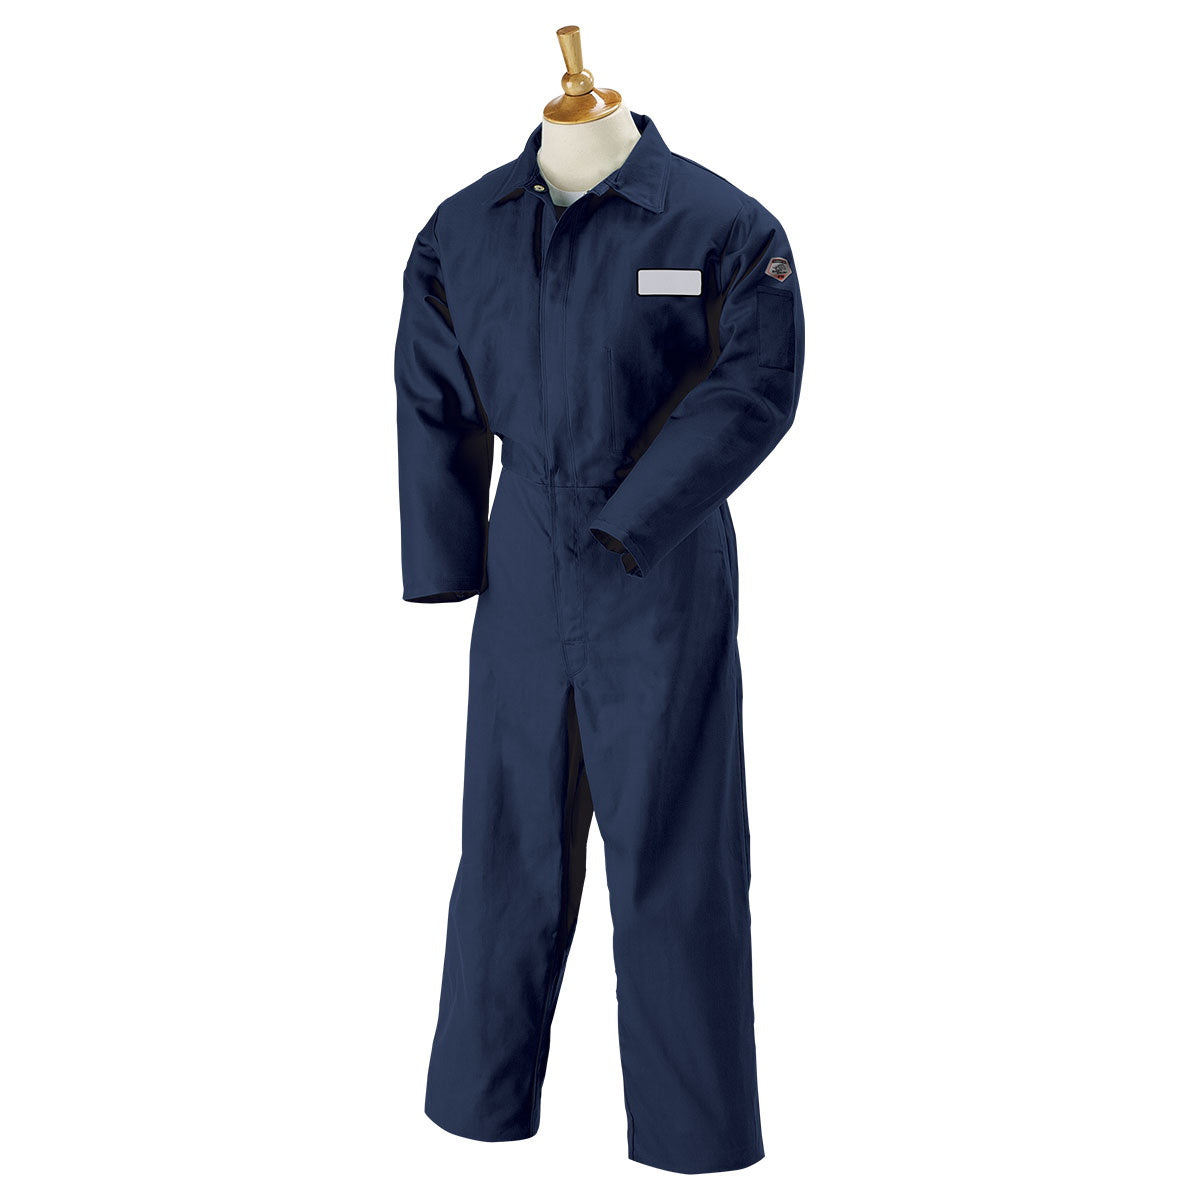 Revco Black Stallion 9oz Navy FR Cotton Coveralls for sale (FN9-32CA/PT)  Buy at Welding Supplies from IOC